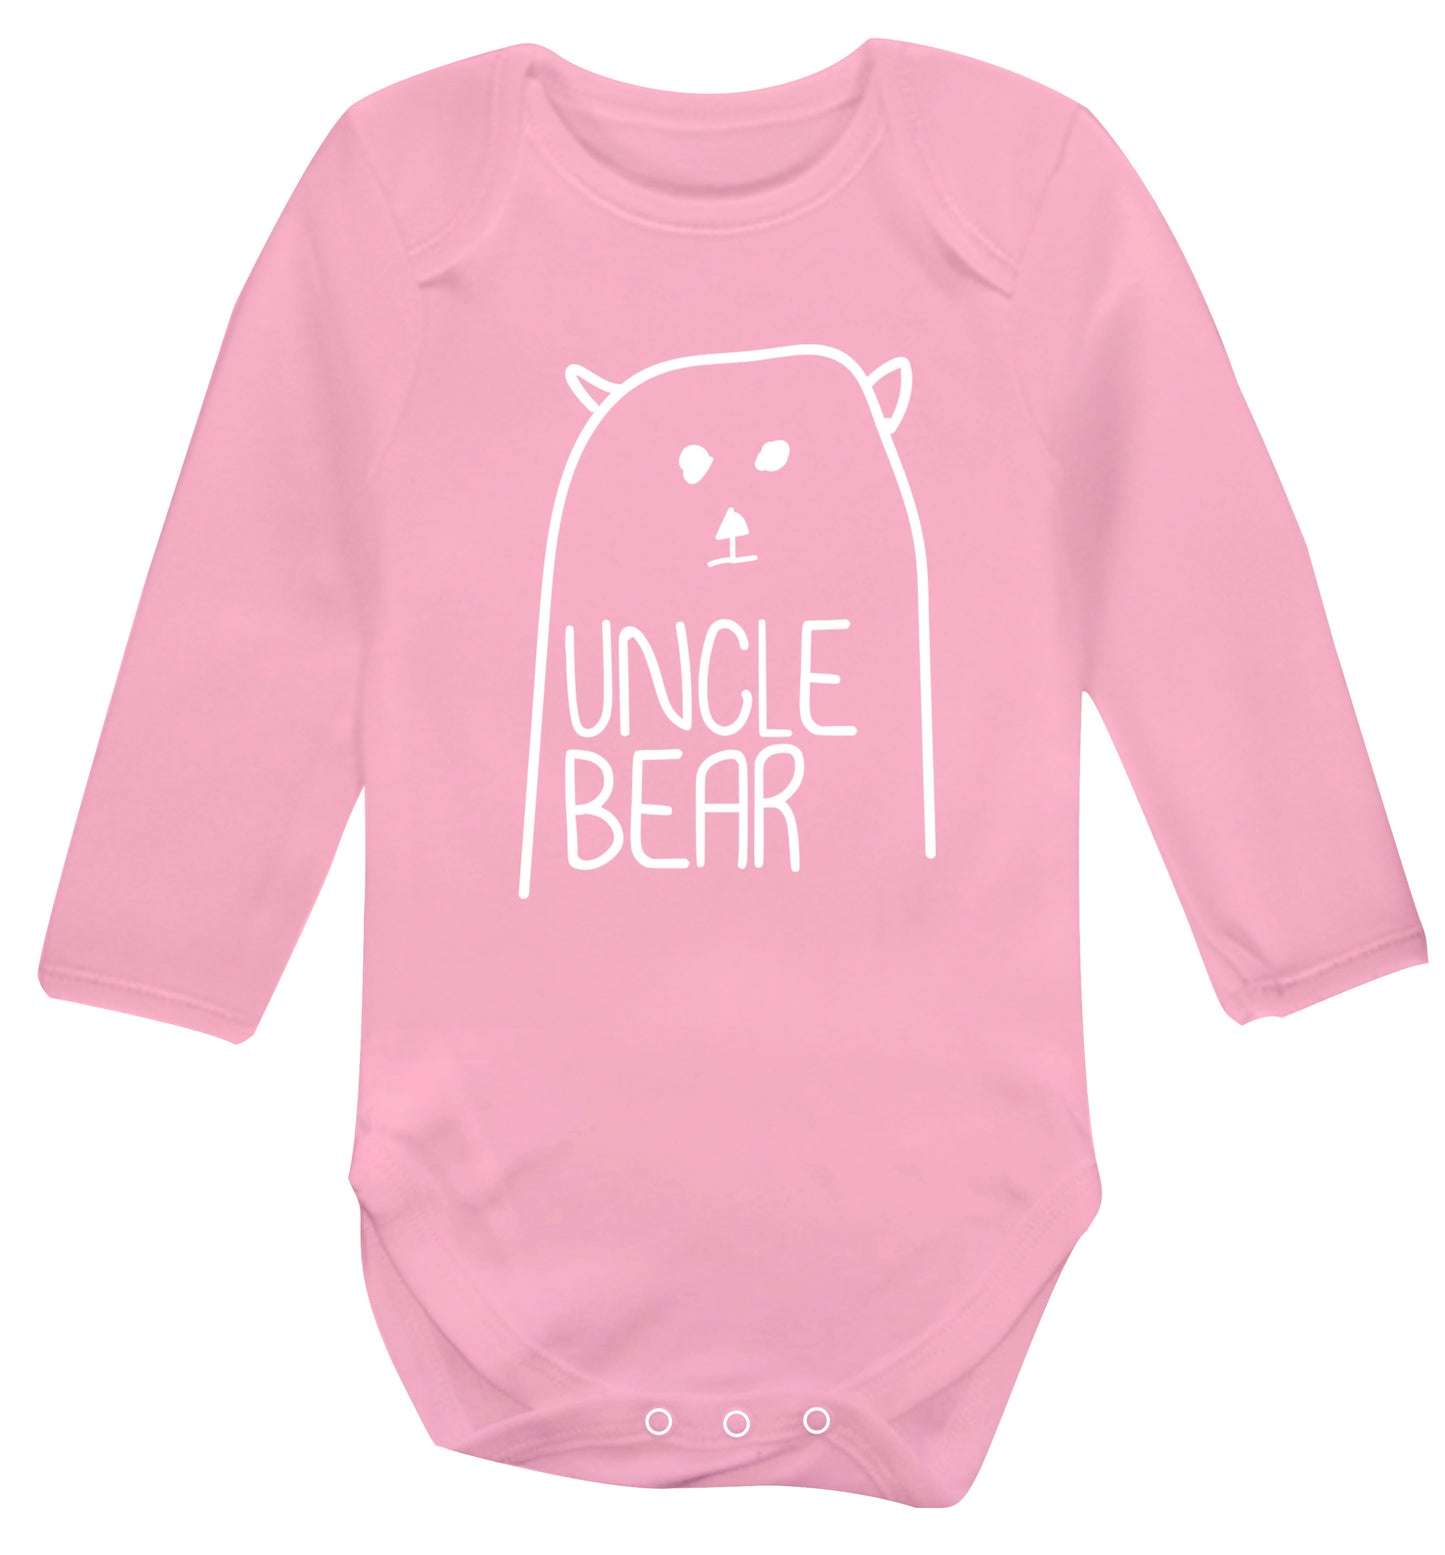 Uncle bear Baby Vest long sleeved pale pink 6-12 months